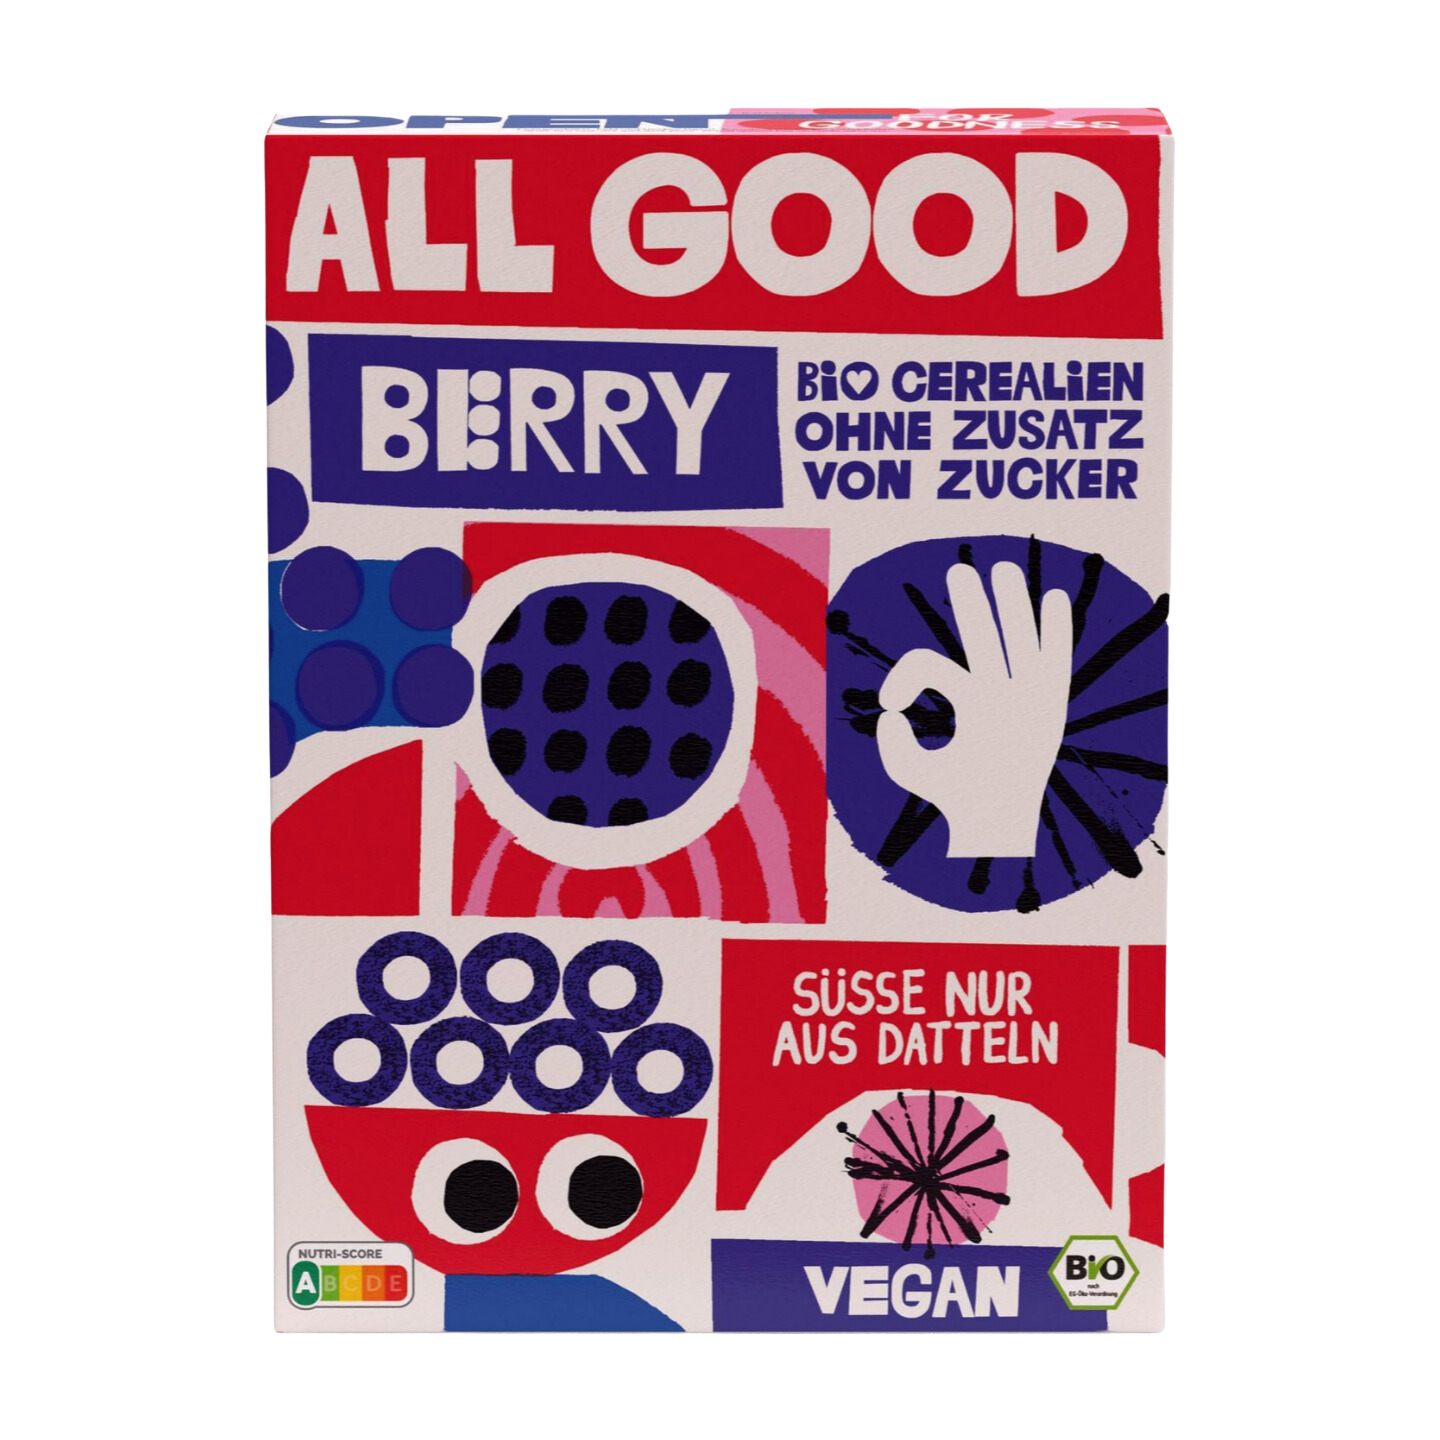 All Good Cereal Berry eco